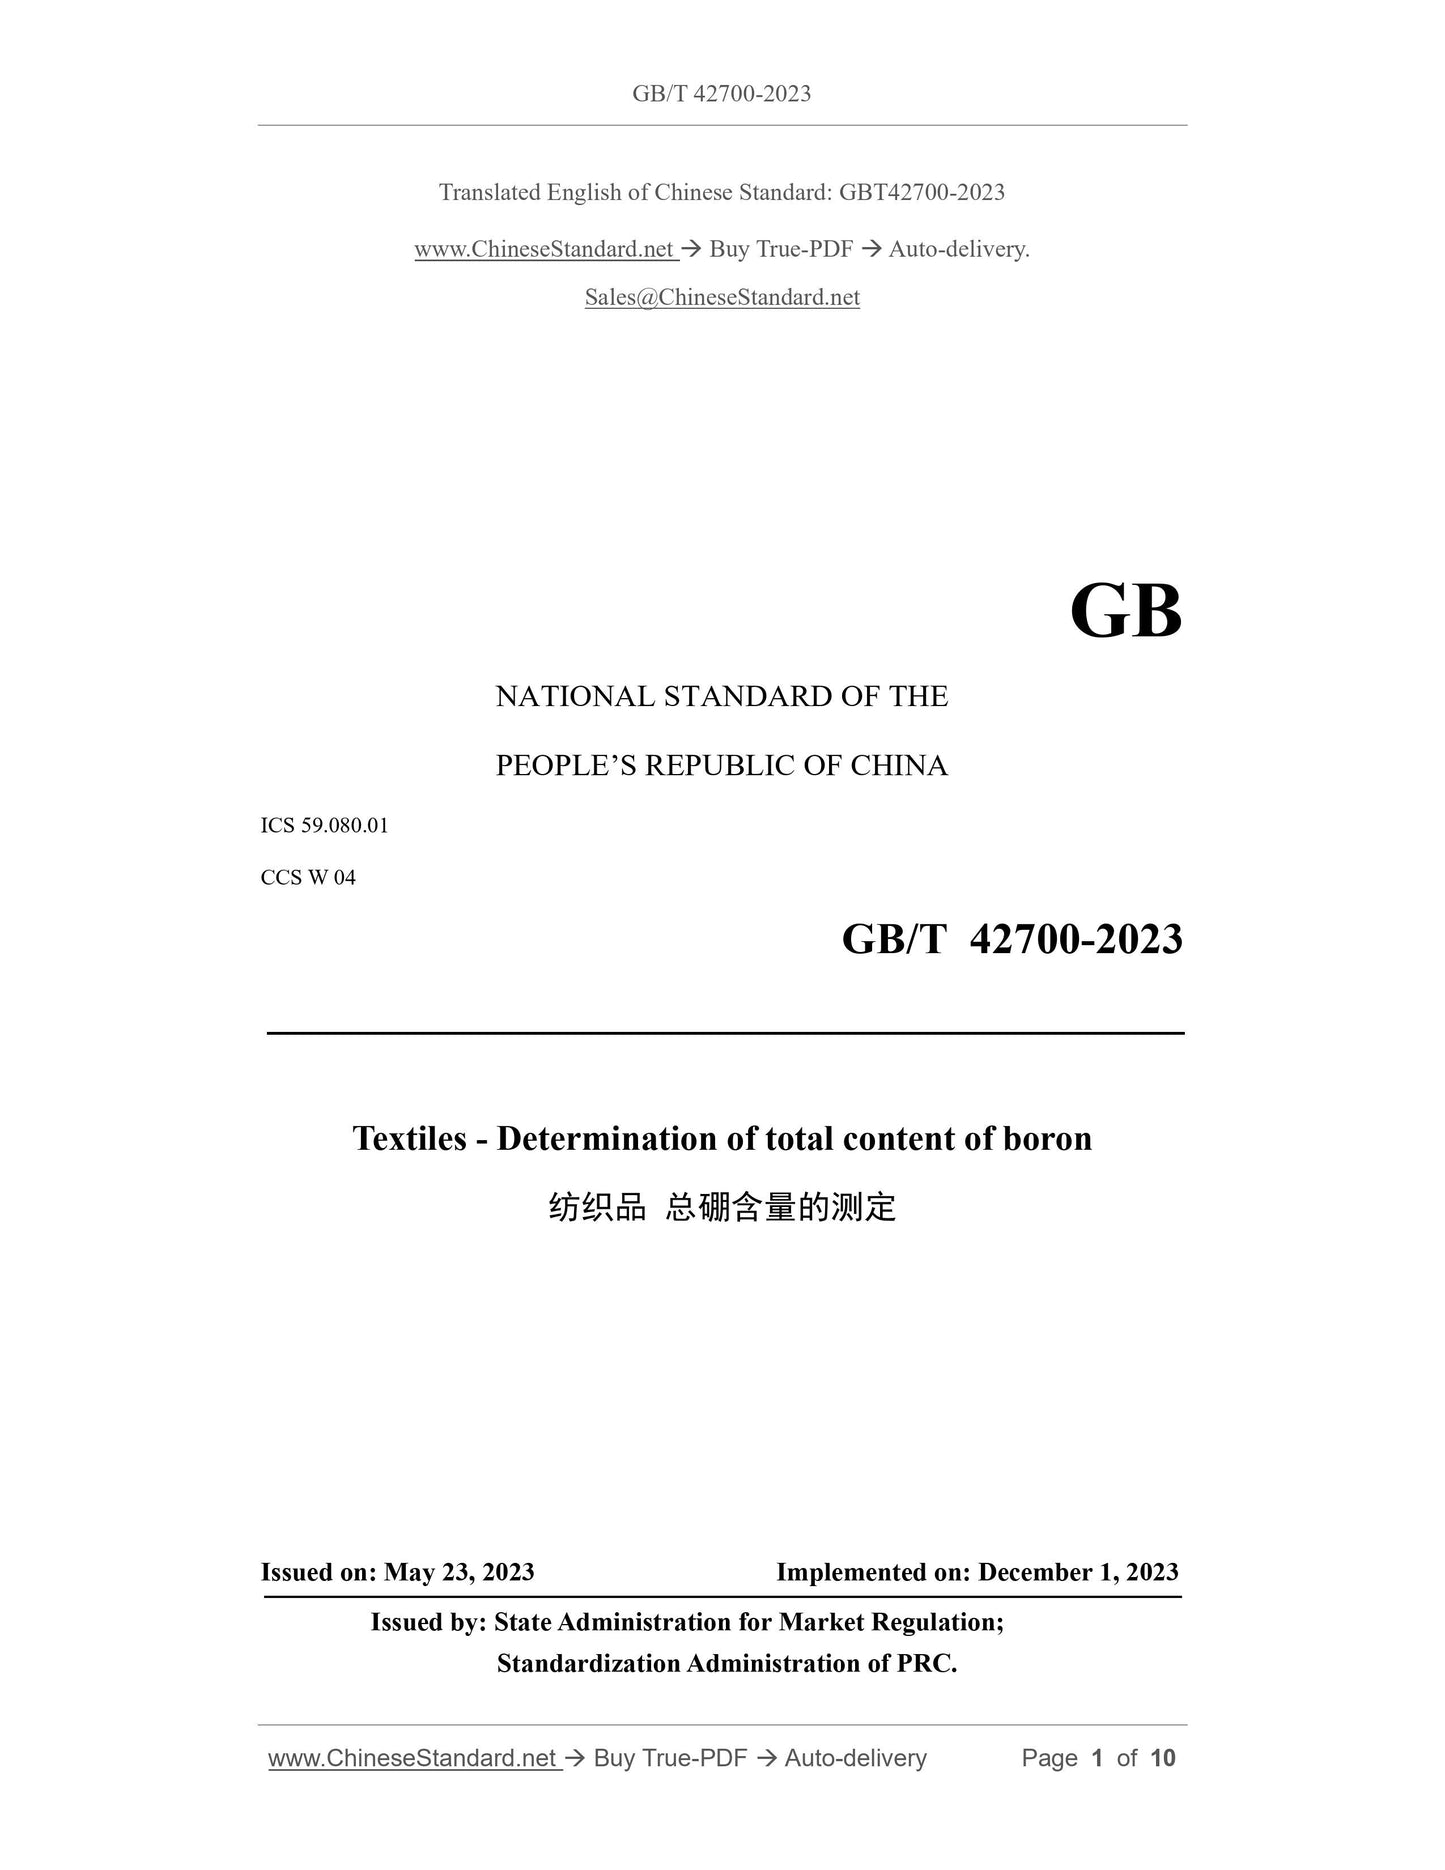 GB/T 42700-2023 Page 1